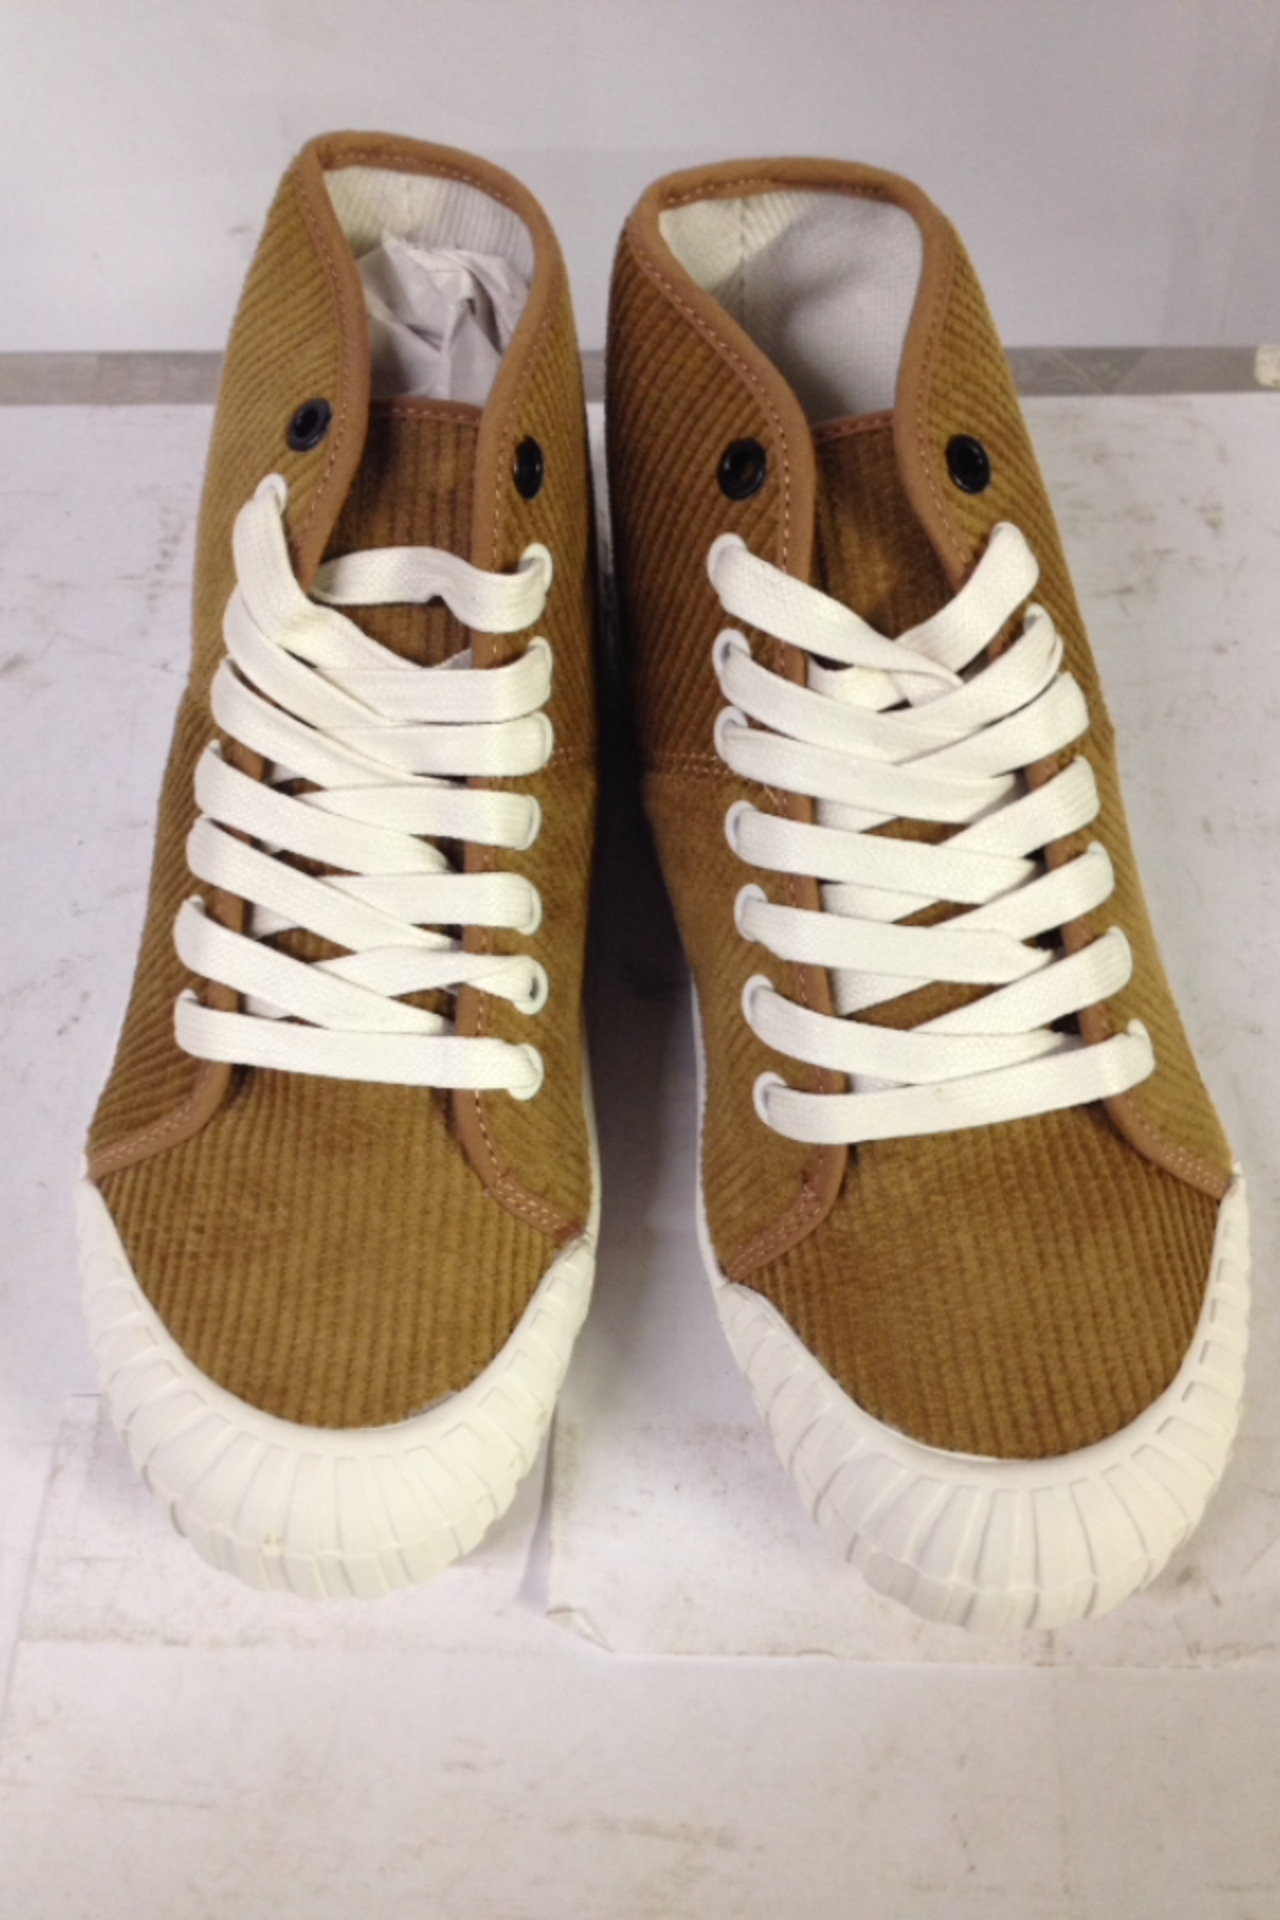 1 x Good News Trainers | Corduroy/Canvas-Natural Rubber | Colour: Tan | UK Size: 8 | RRP £ 60 - Image 2 of 2